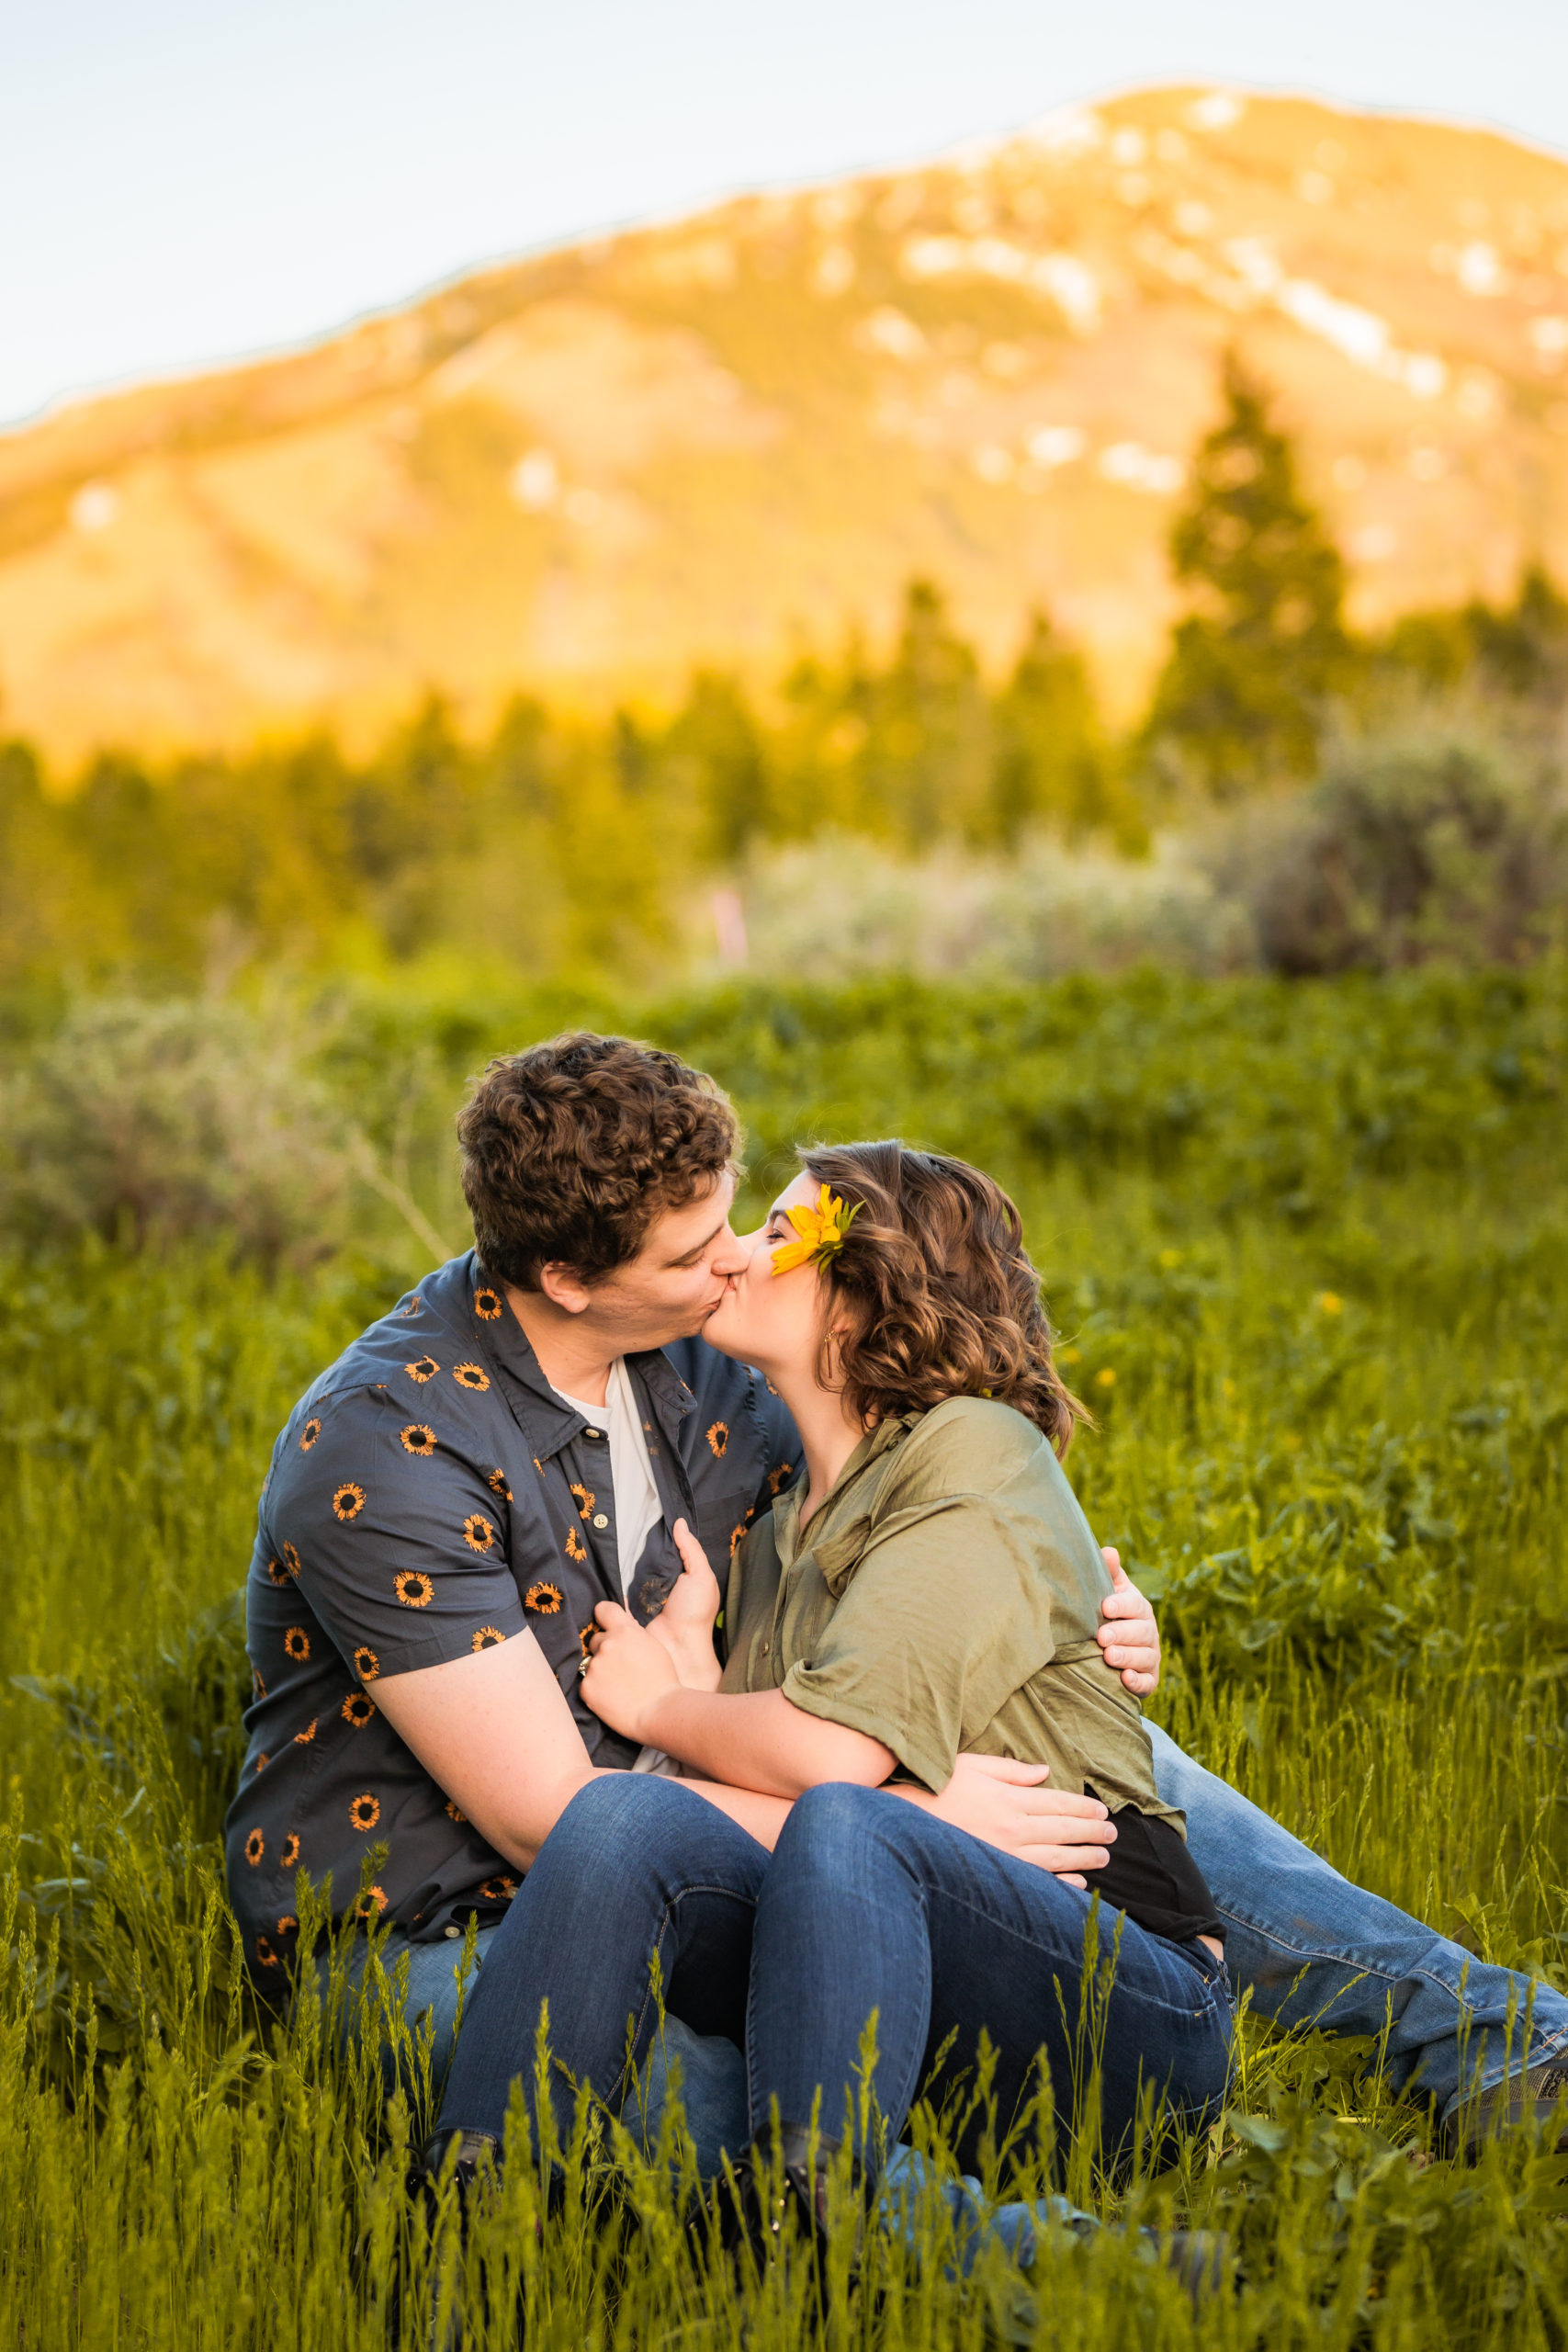 couple sitting in grass kissing during spring outdoor engagements